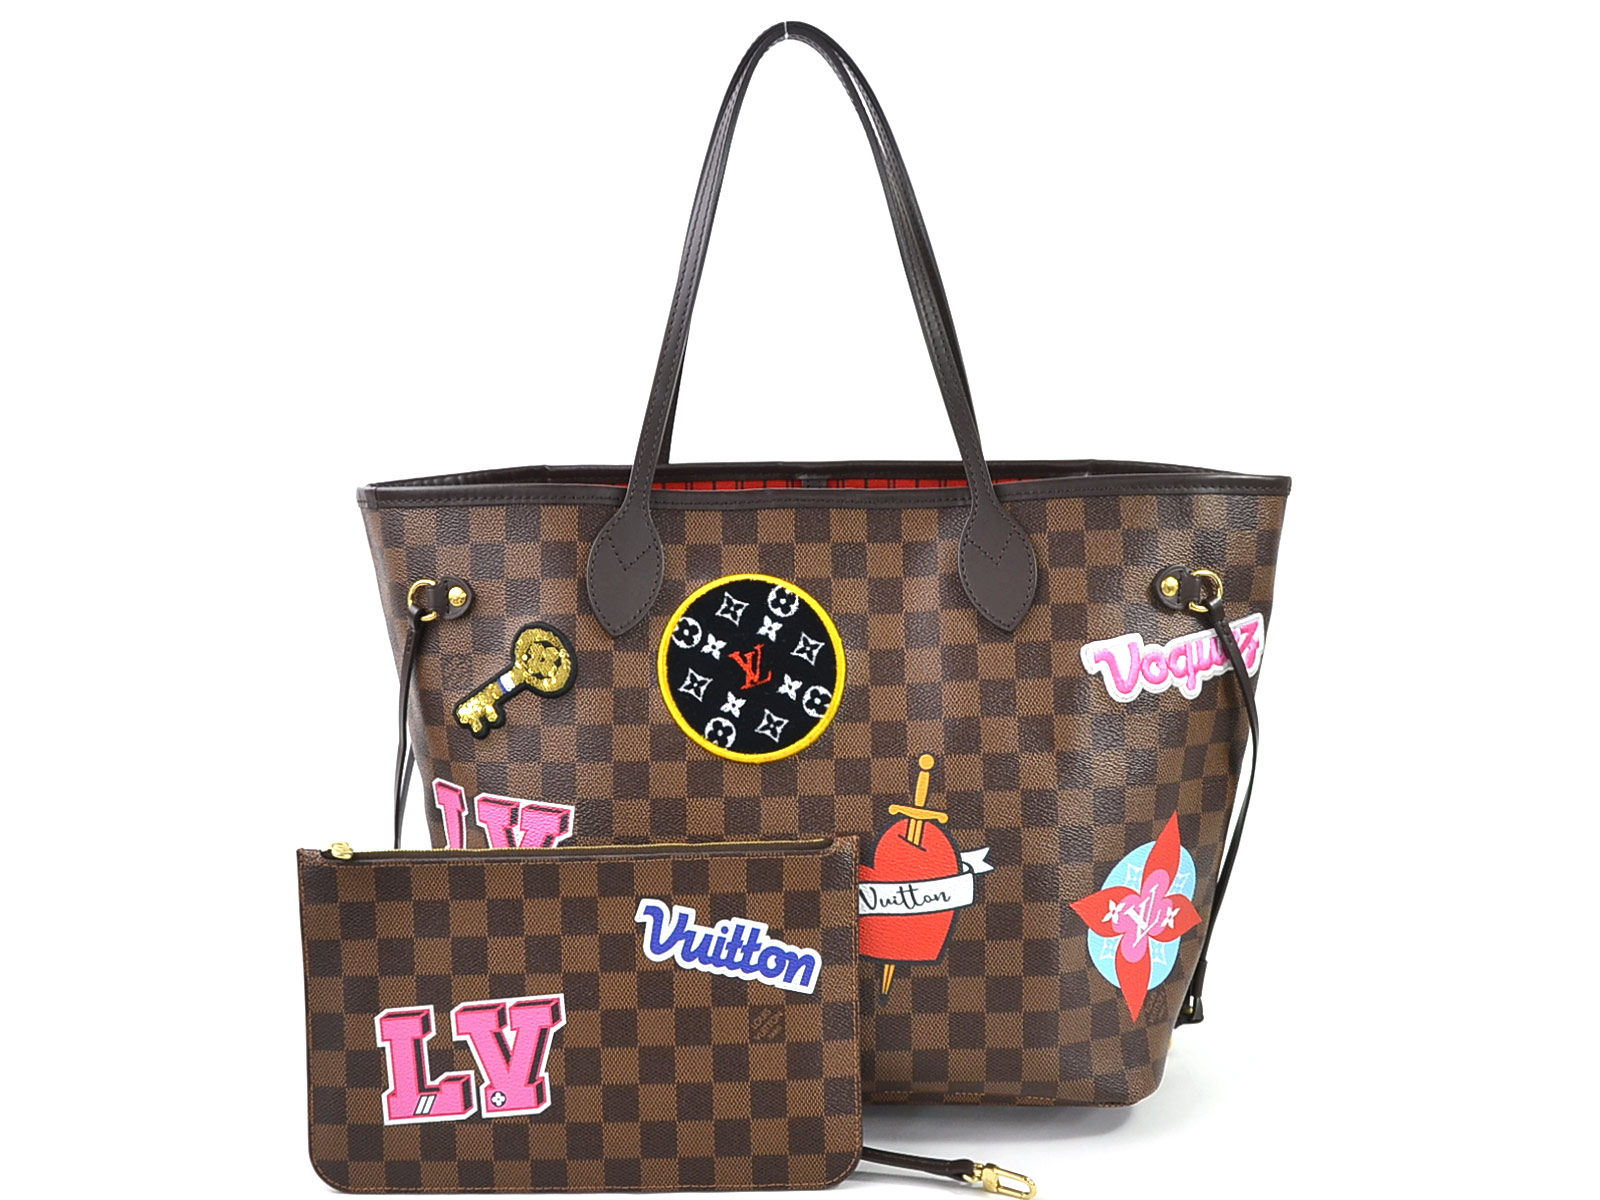 Auth Louis Vuitton Damier Neverfull MM Patches Tote Shoulder Bag N40049 - 97872c | eBay